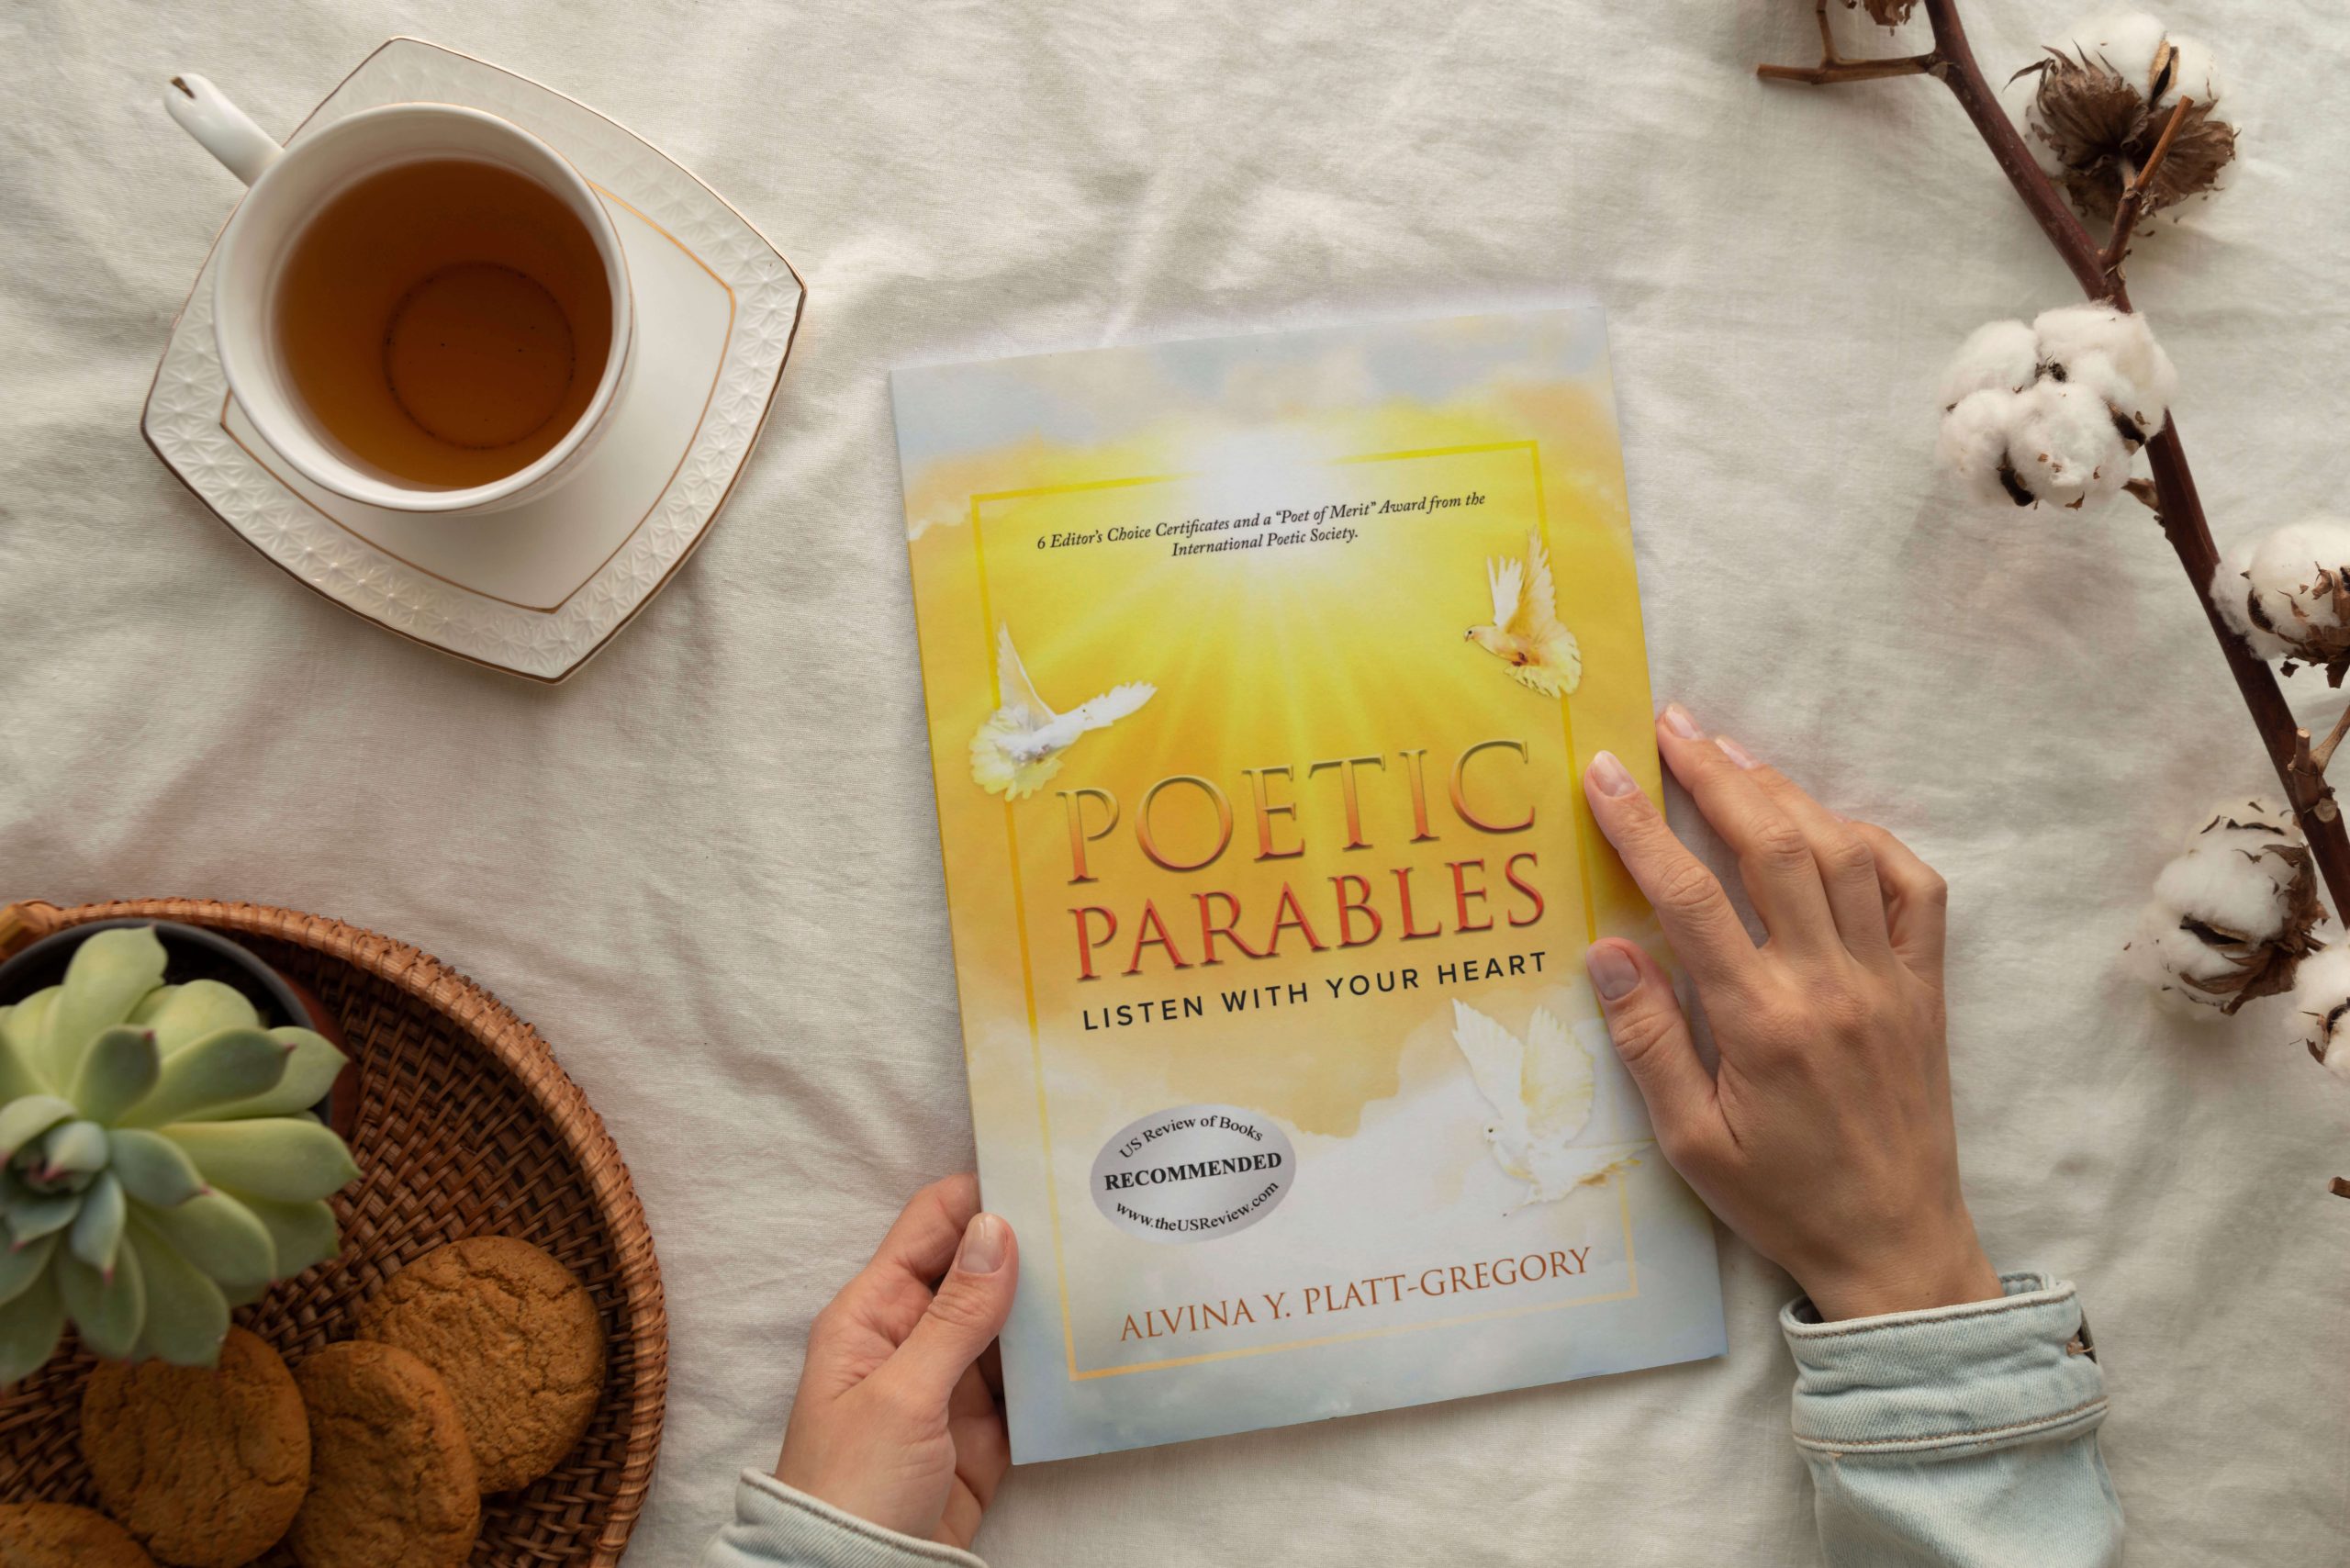 You are currently viewing Poetic Parables by Alvina Platt-Gregory